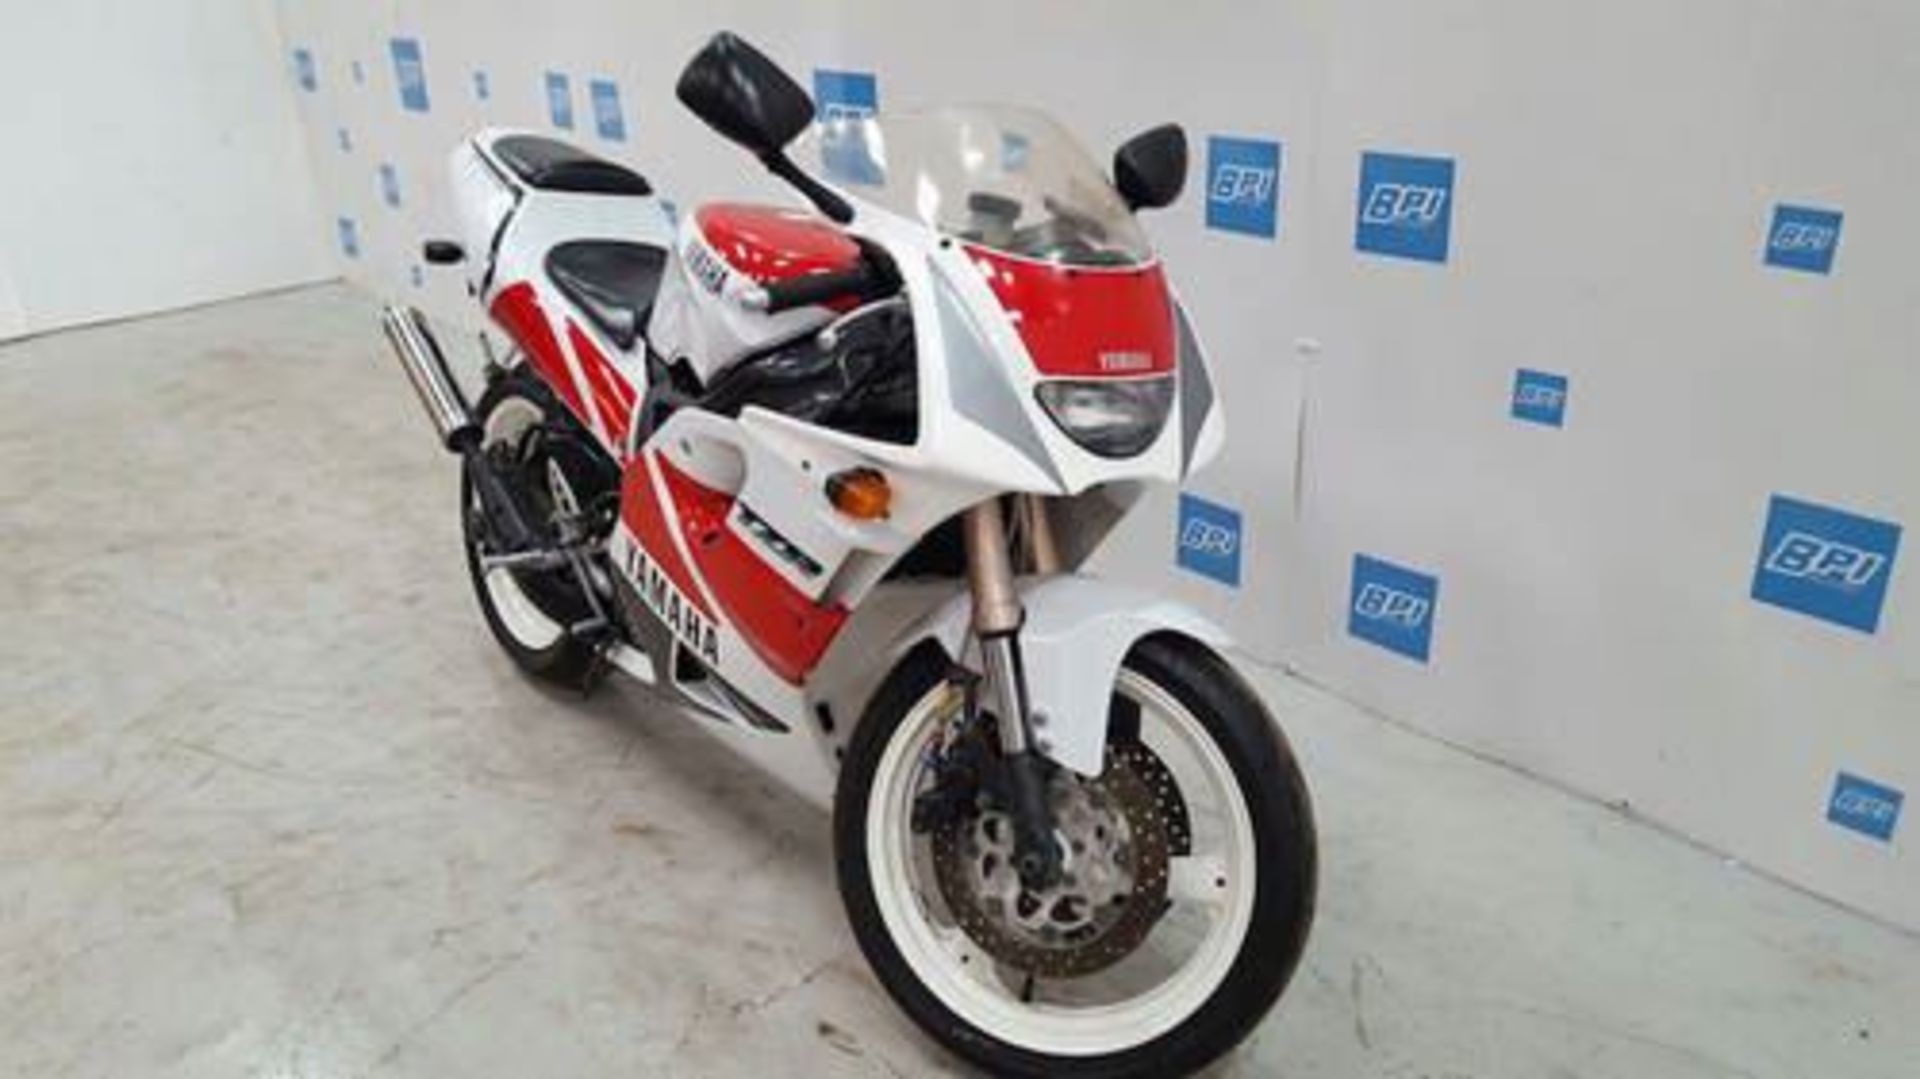 1992 Yamaha TZR250 2 Stroke Only 5,000mils - Image 2 of 6